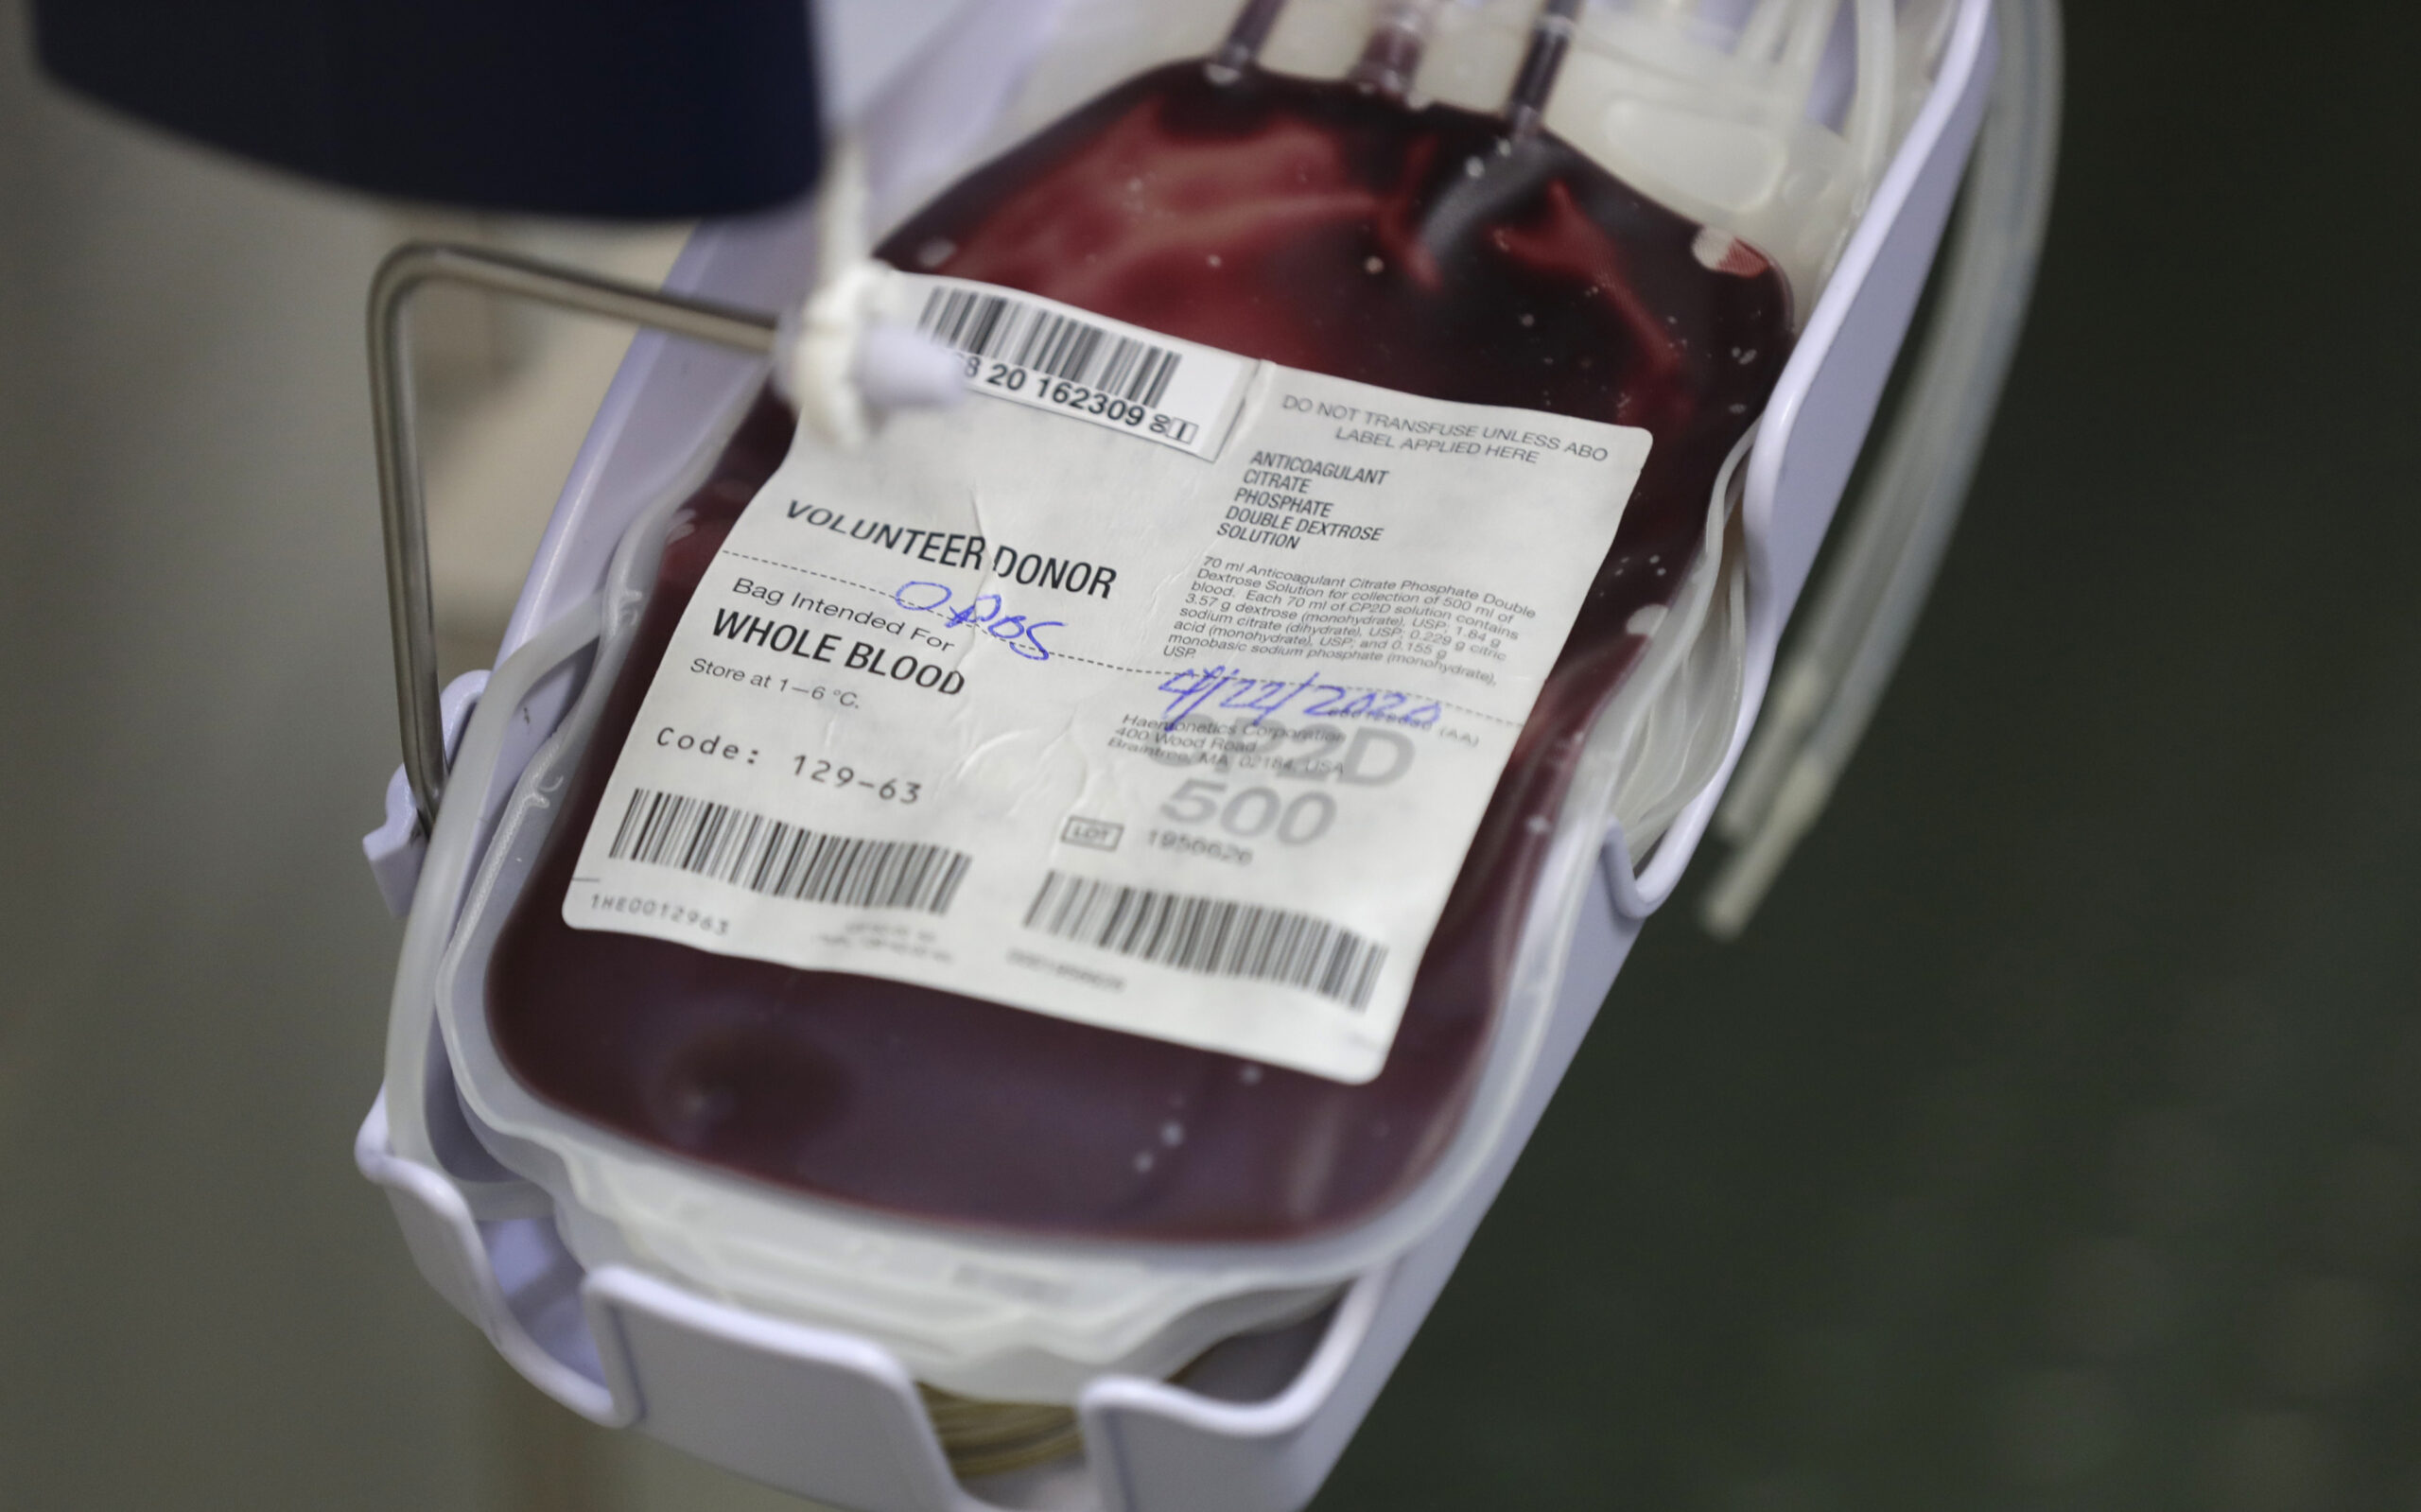 Wisconsin in dire need of blood donations